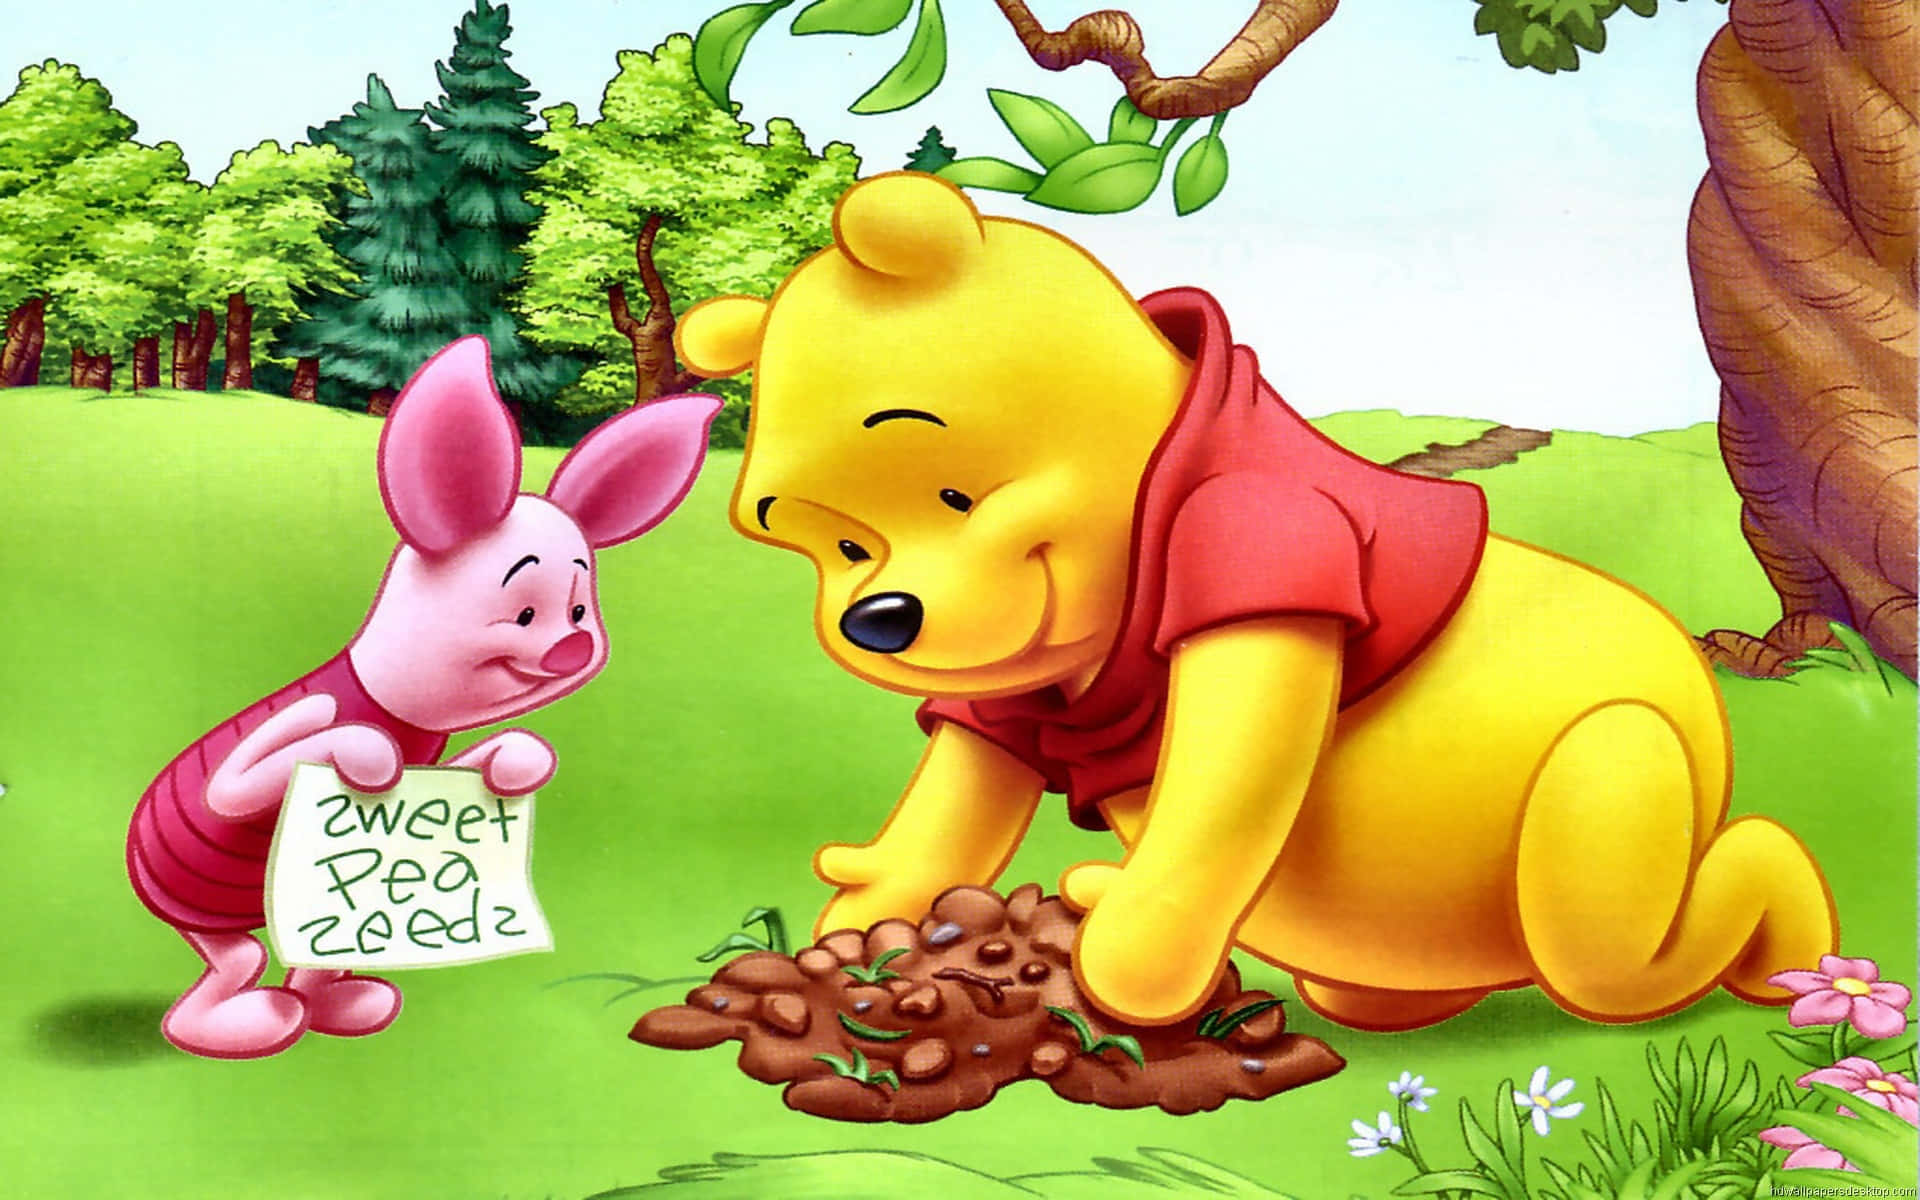 “Cuddling with Winnie The Pooh” Wallpaper